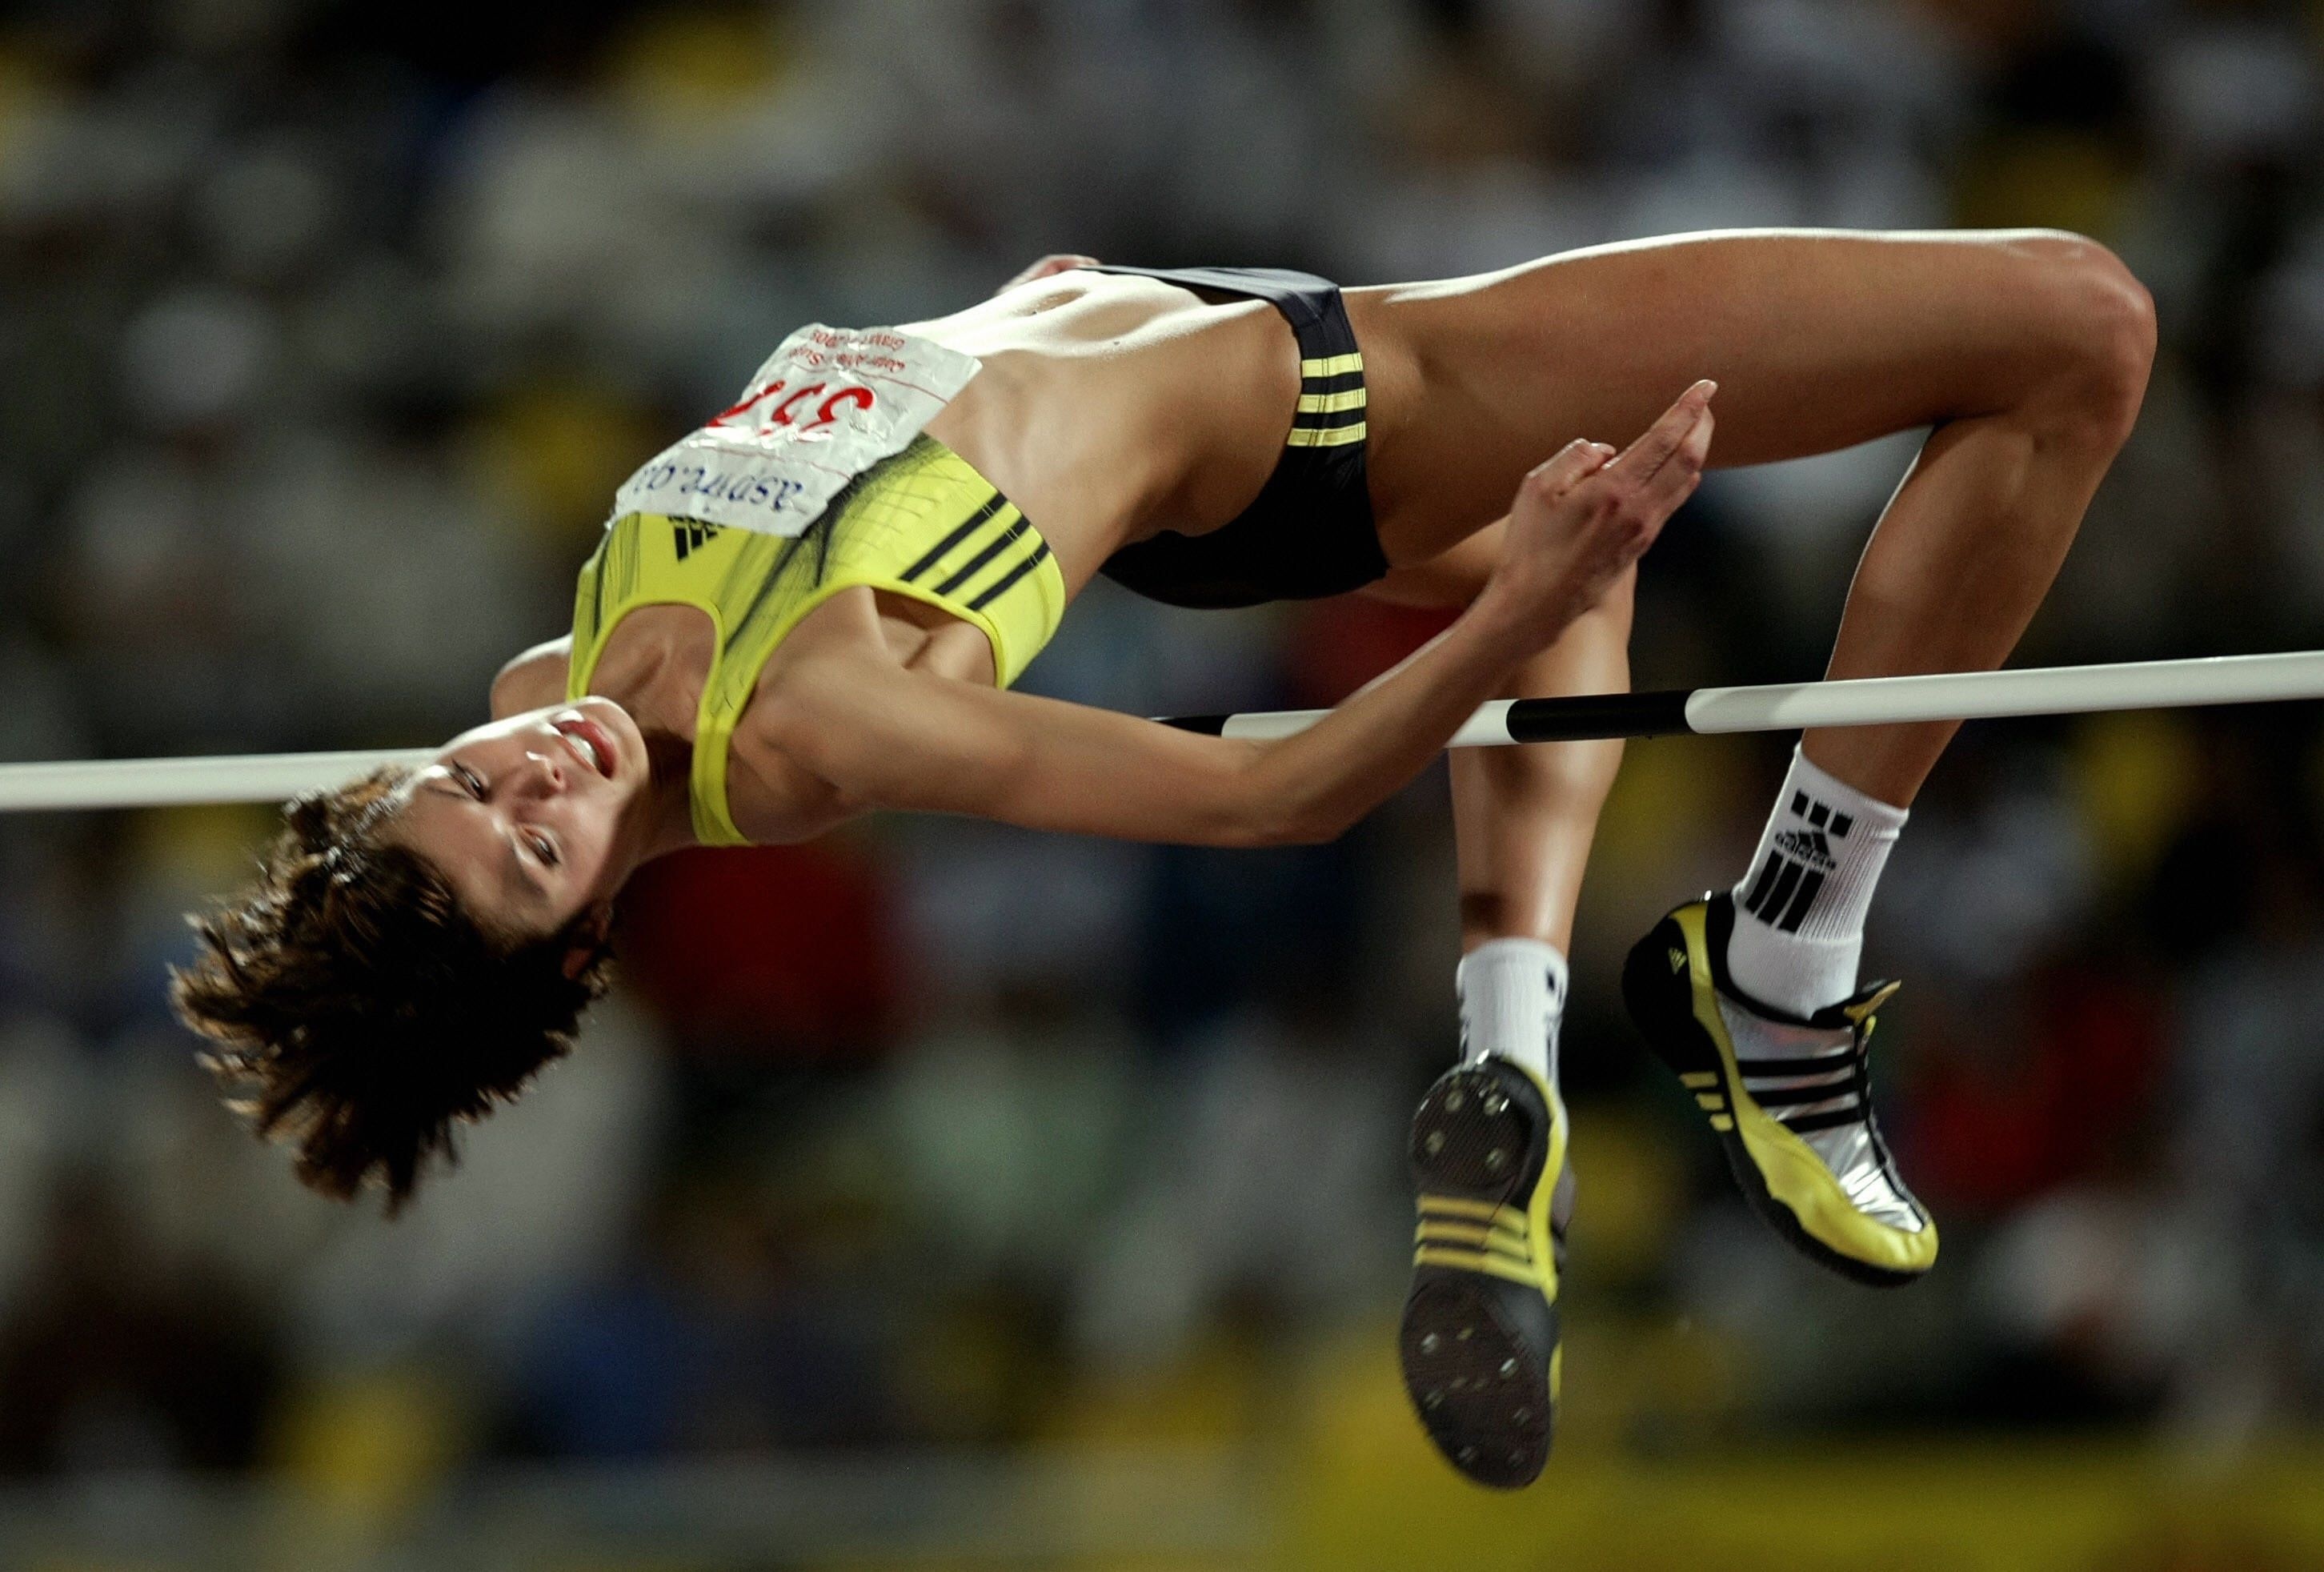 High Jump: Blanka Vlasic, A leap for height made from a running start, Track and field athletics. 2910x1970 HD Wallpaper.